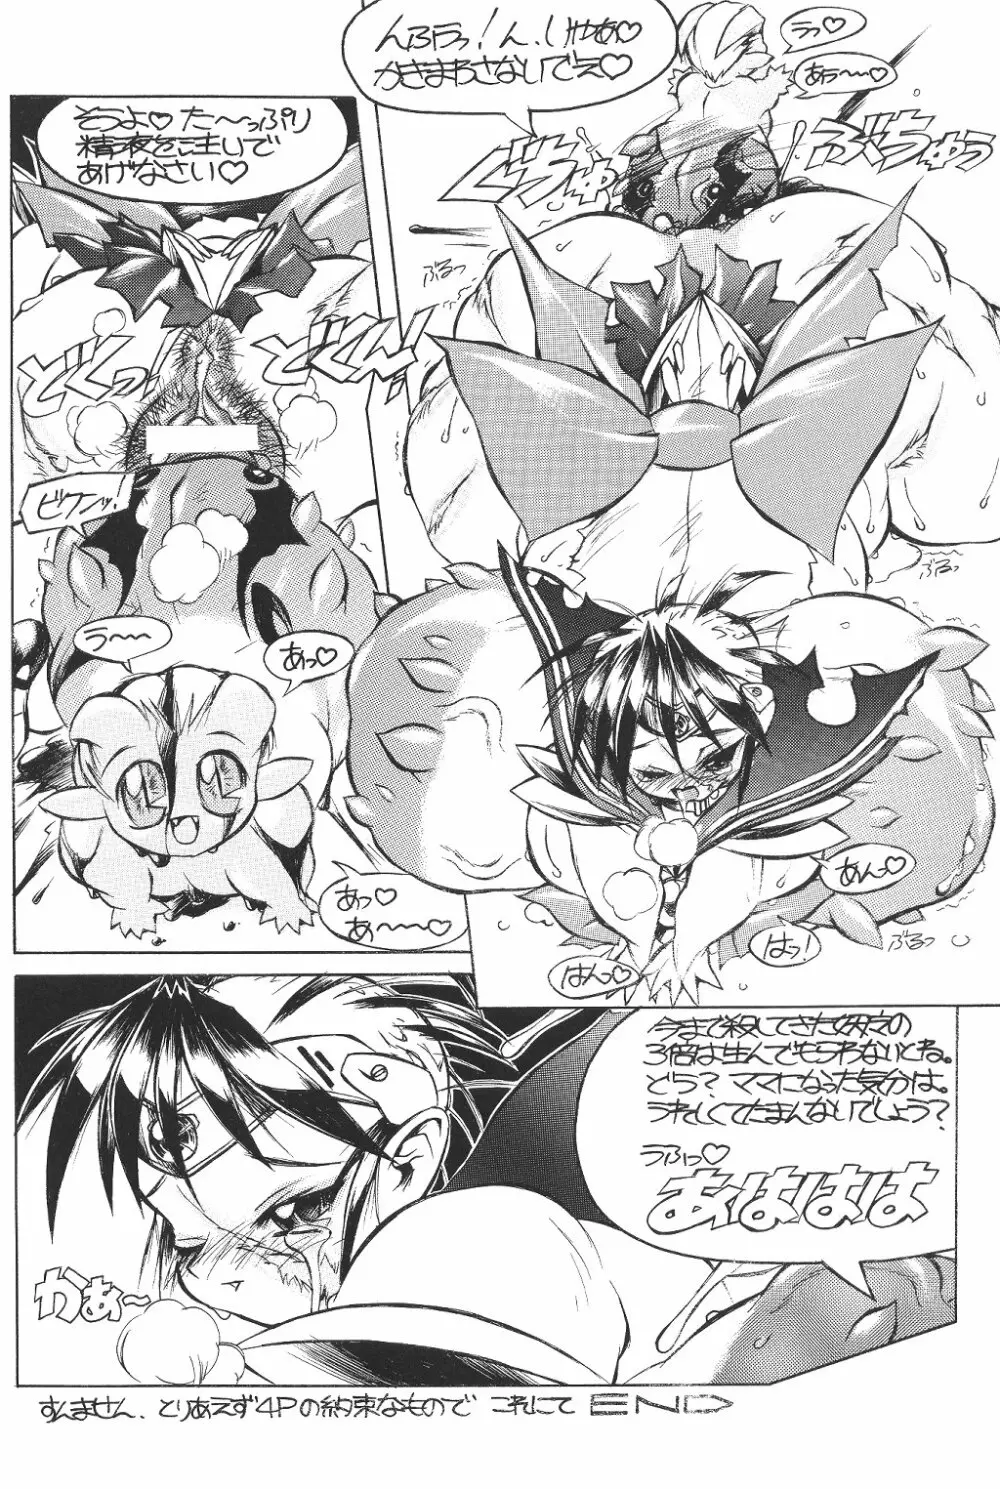 MaD ArtistS SailoR MooN Page.47